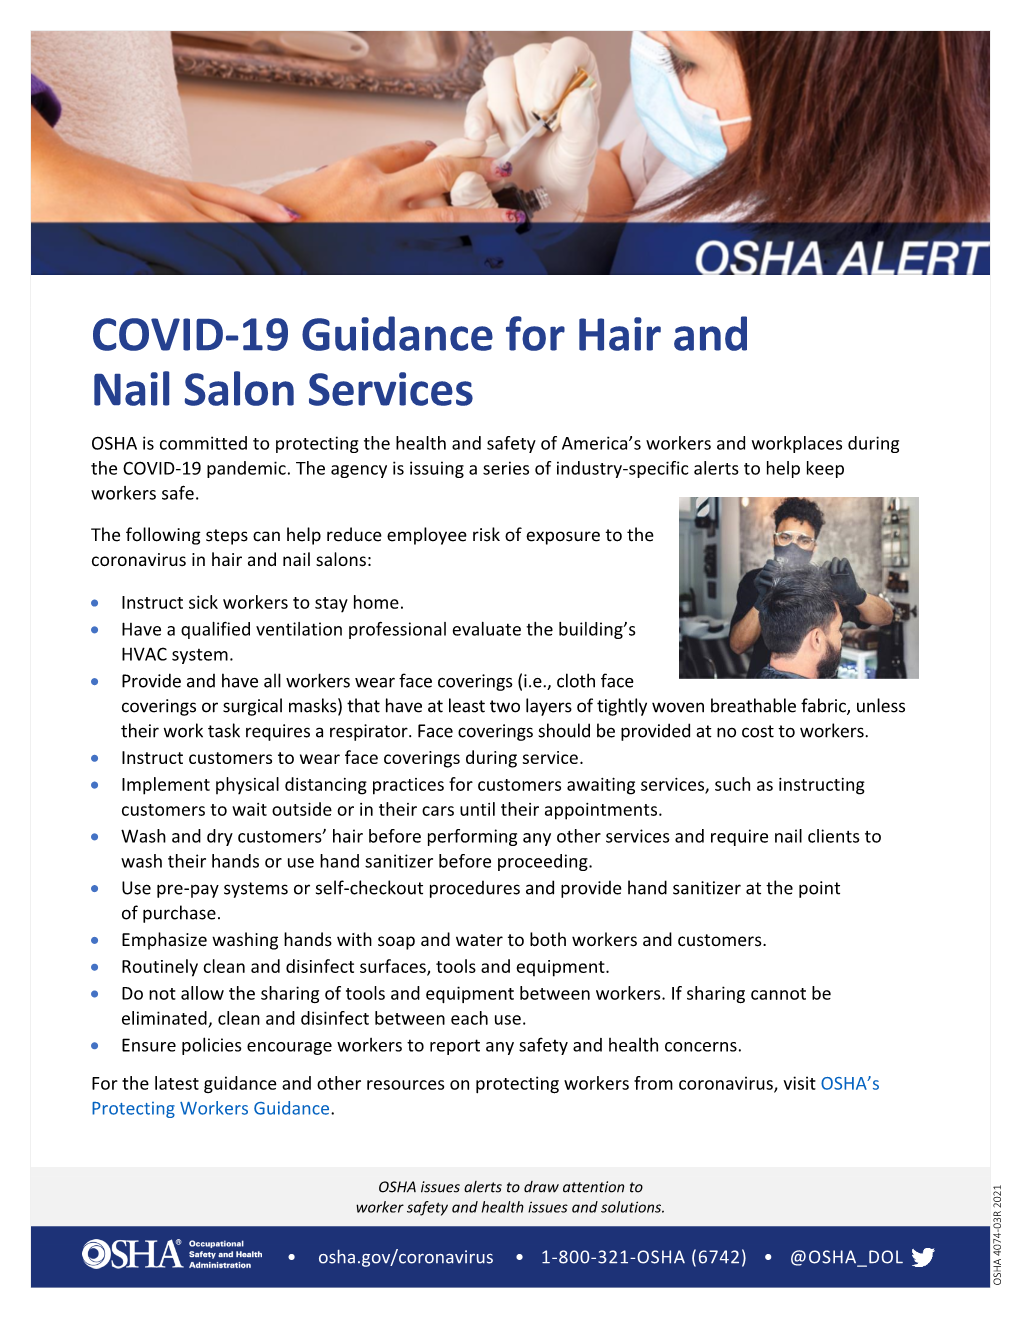 COVID-19 Guidance for Hair and Nail Salon Services